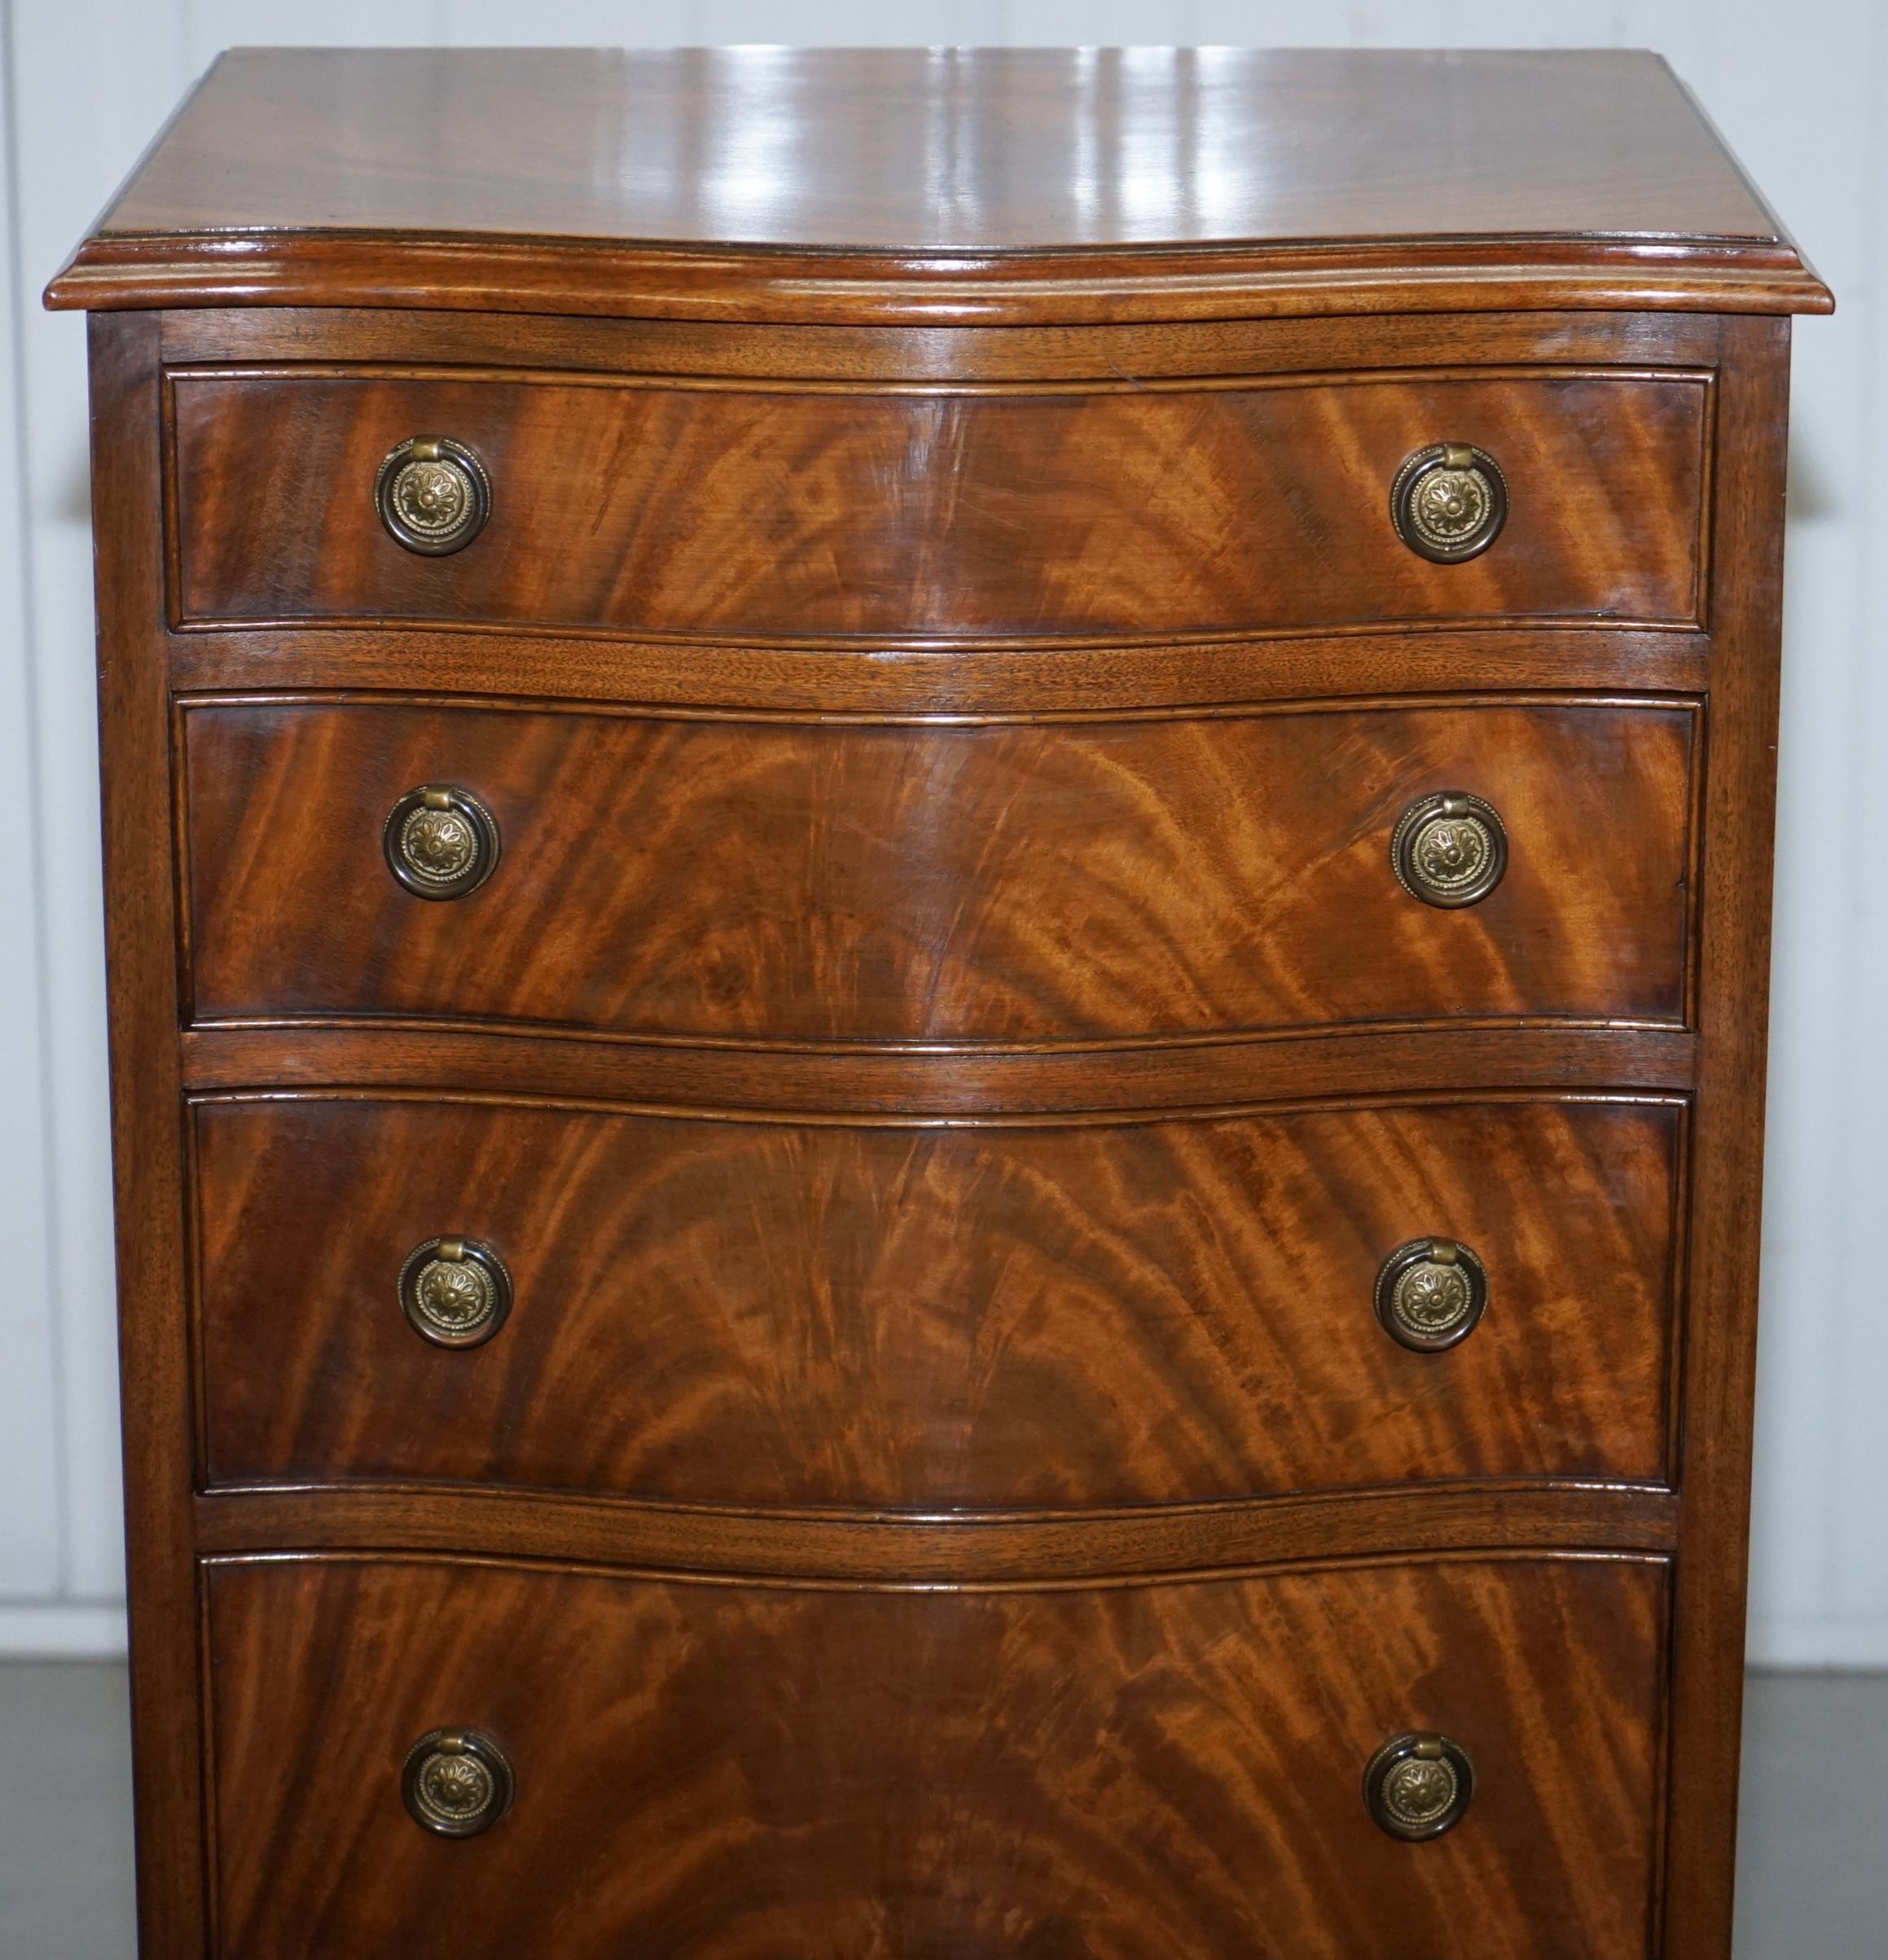 Modern Nice Flamed Hardwood Bevan Funnell Serpentine Fronted Tall Boy Chest of Drawers